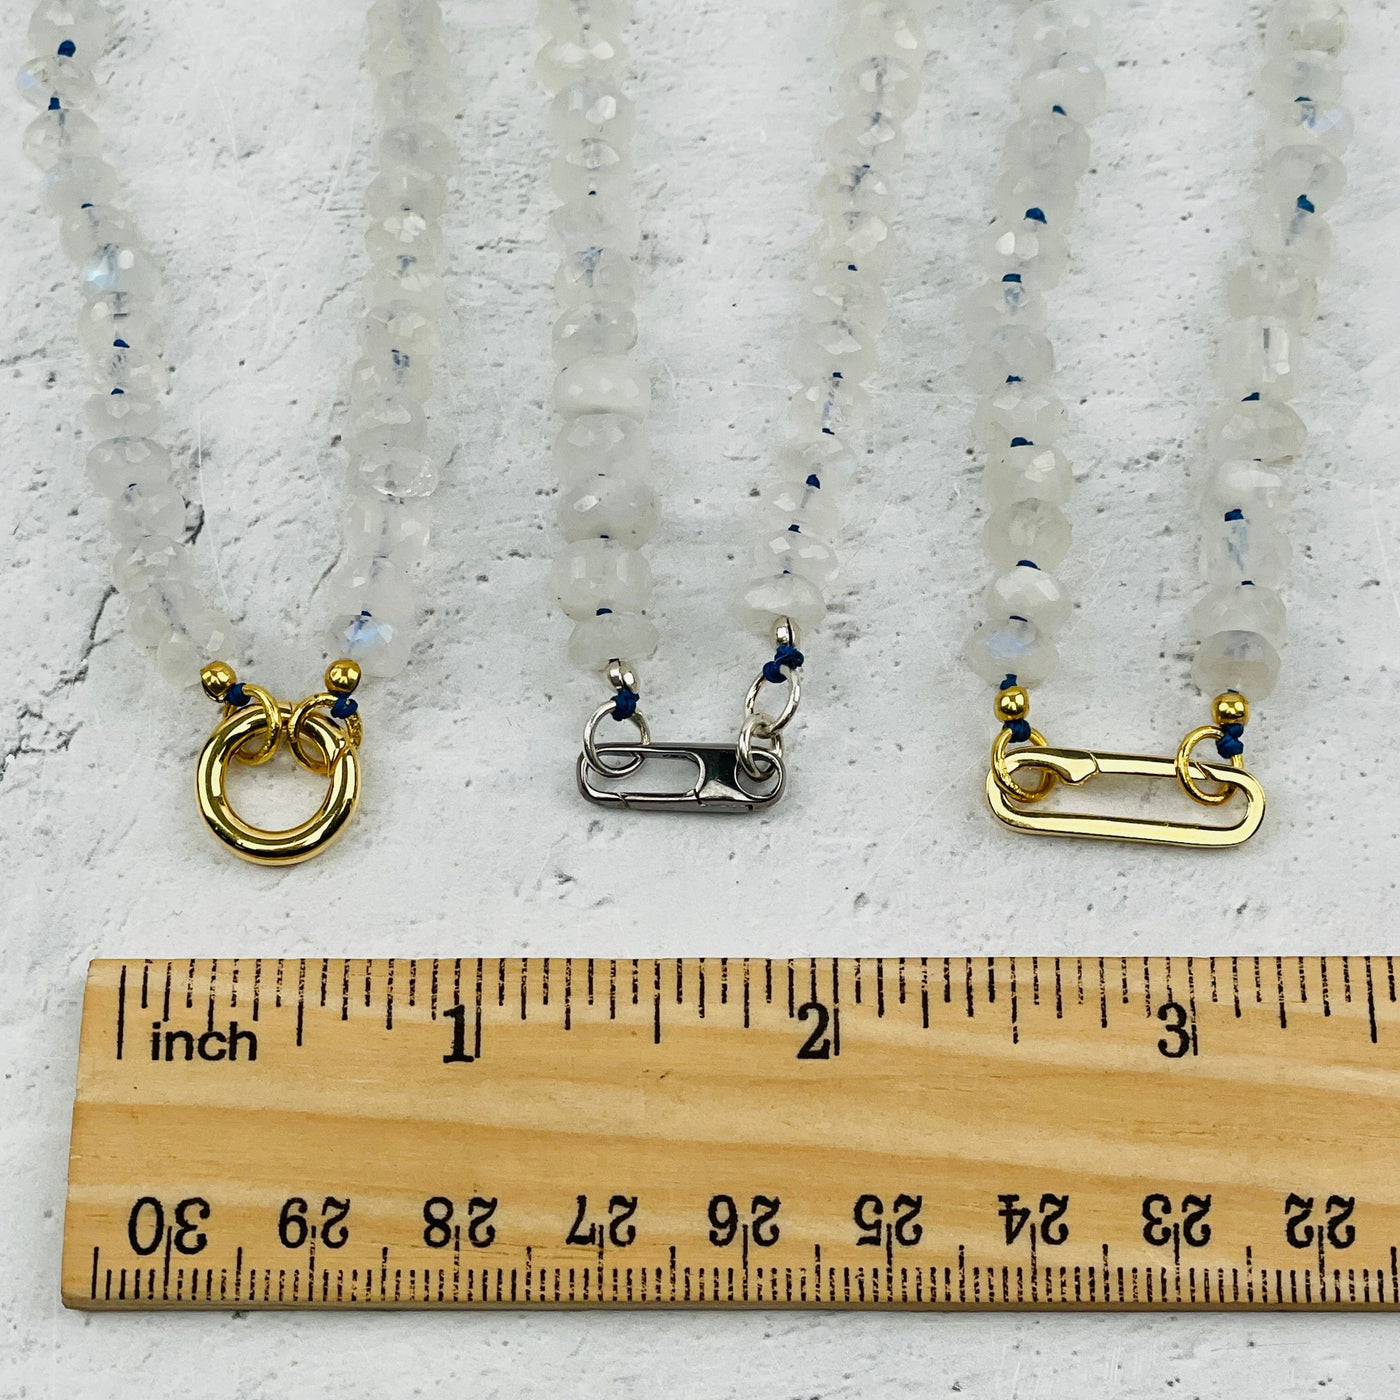 clasps next to a ruler for size reference 